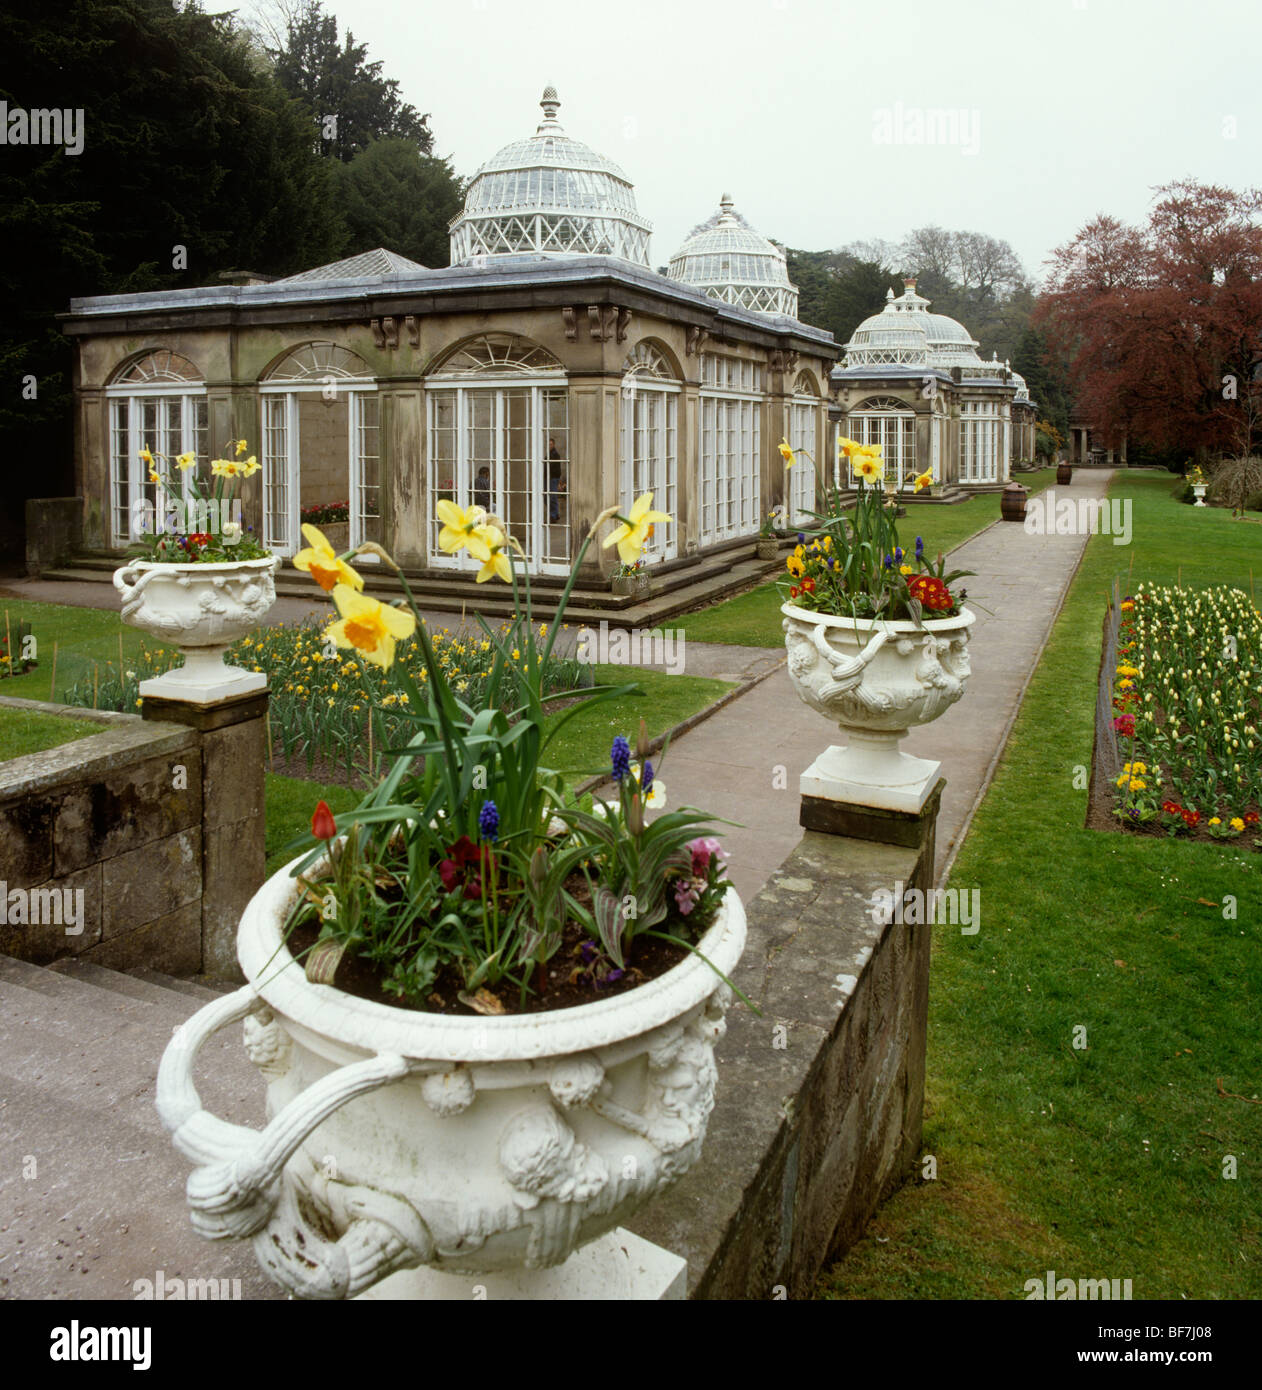 UK, England, Staffordshire, Alton Towers Pavilions in the old gardens Stock Photo